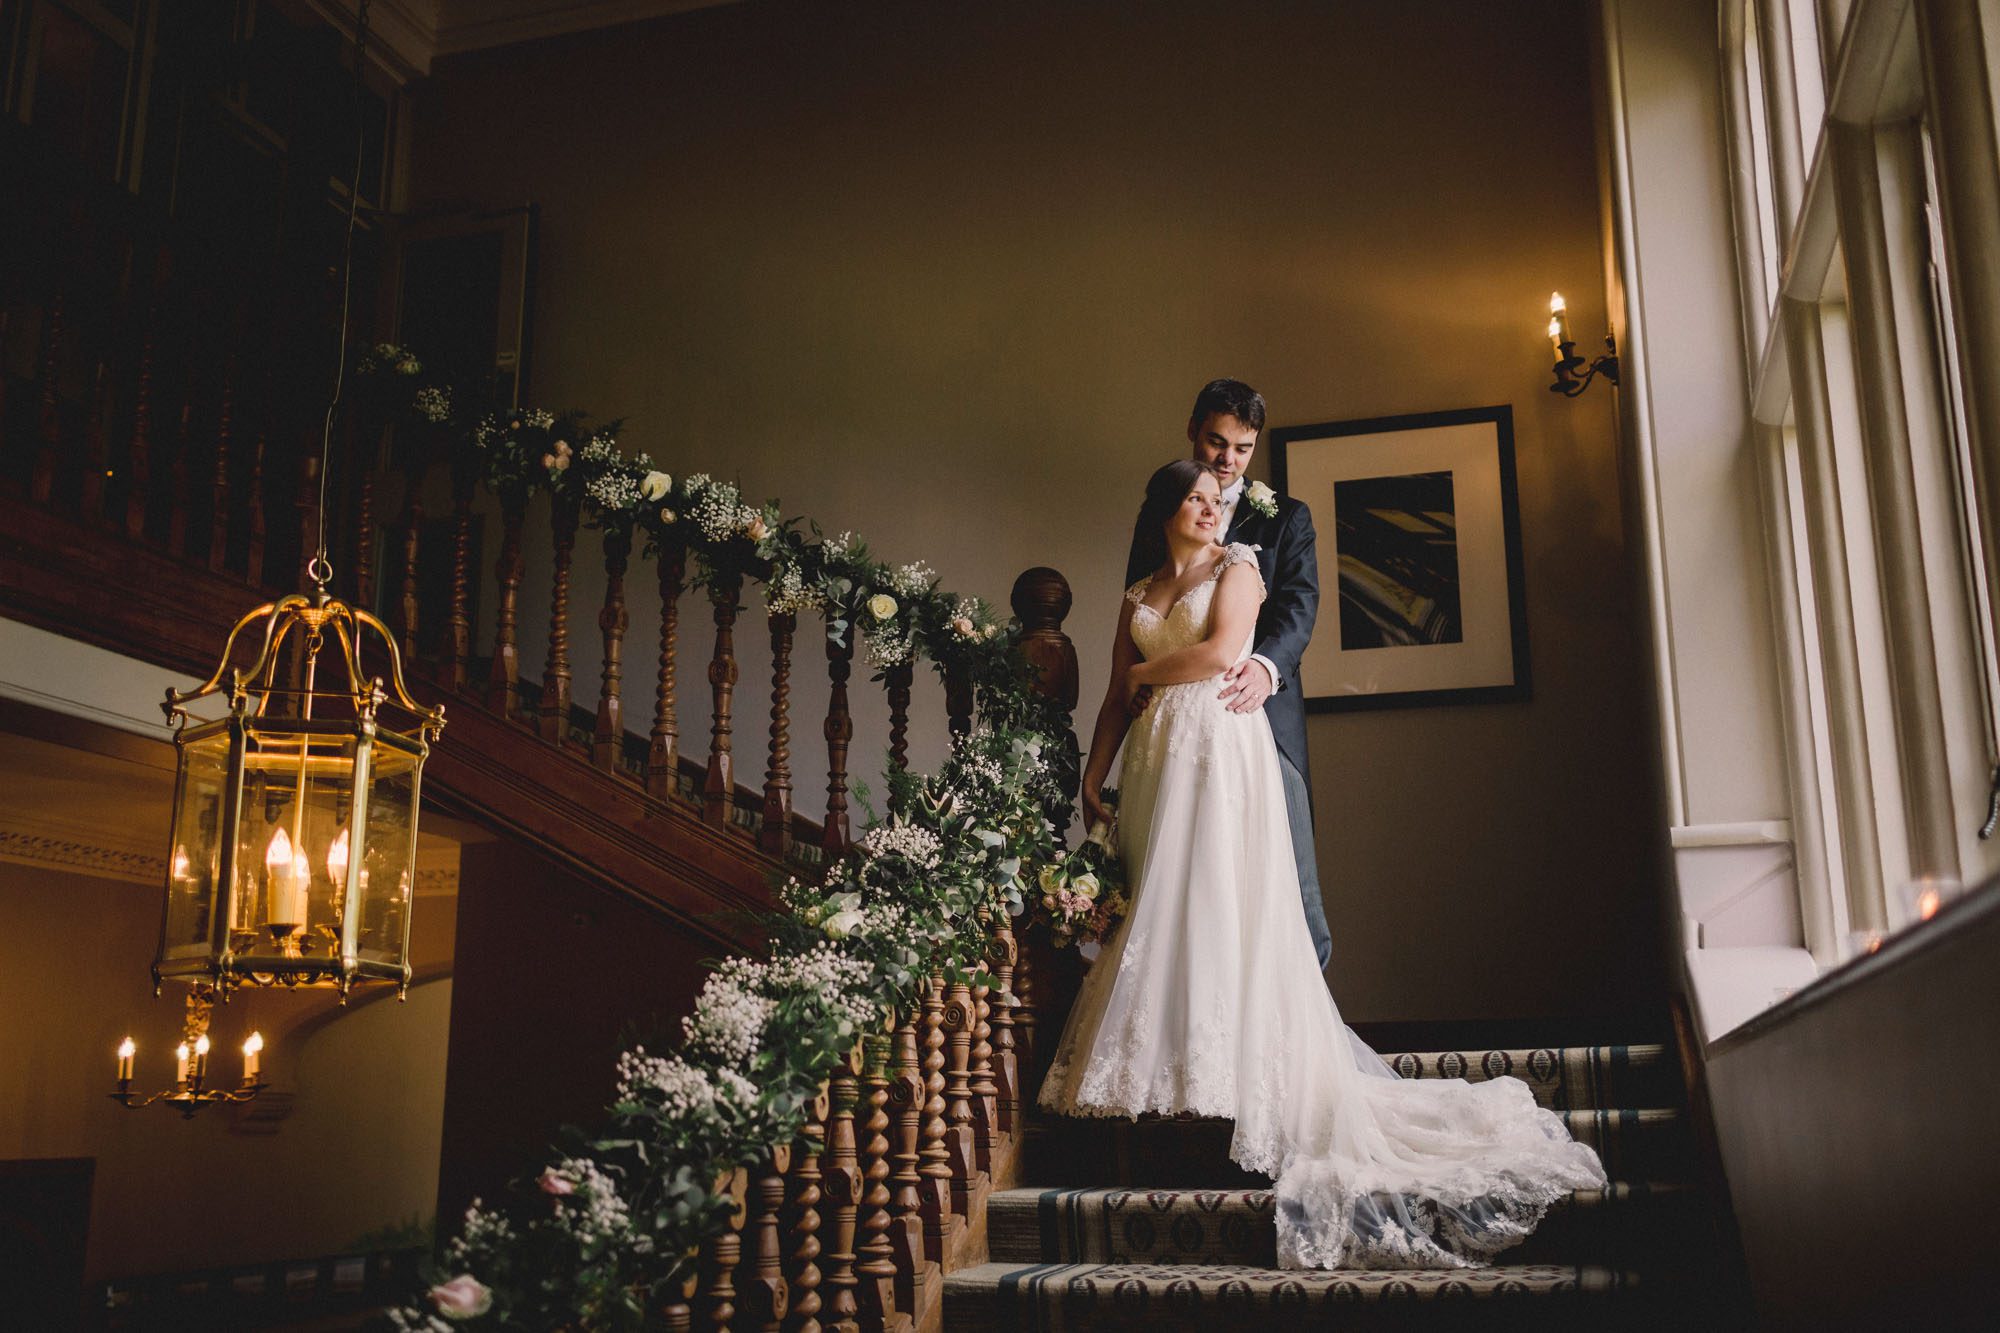 Bride and groom hug closely on the grand staircase on their wedding day at Hartsfield Manor.